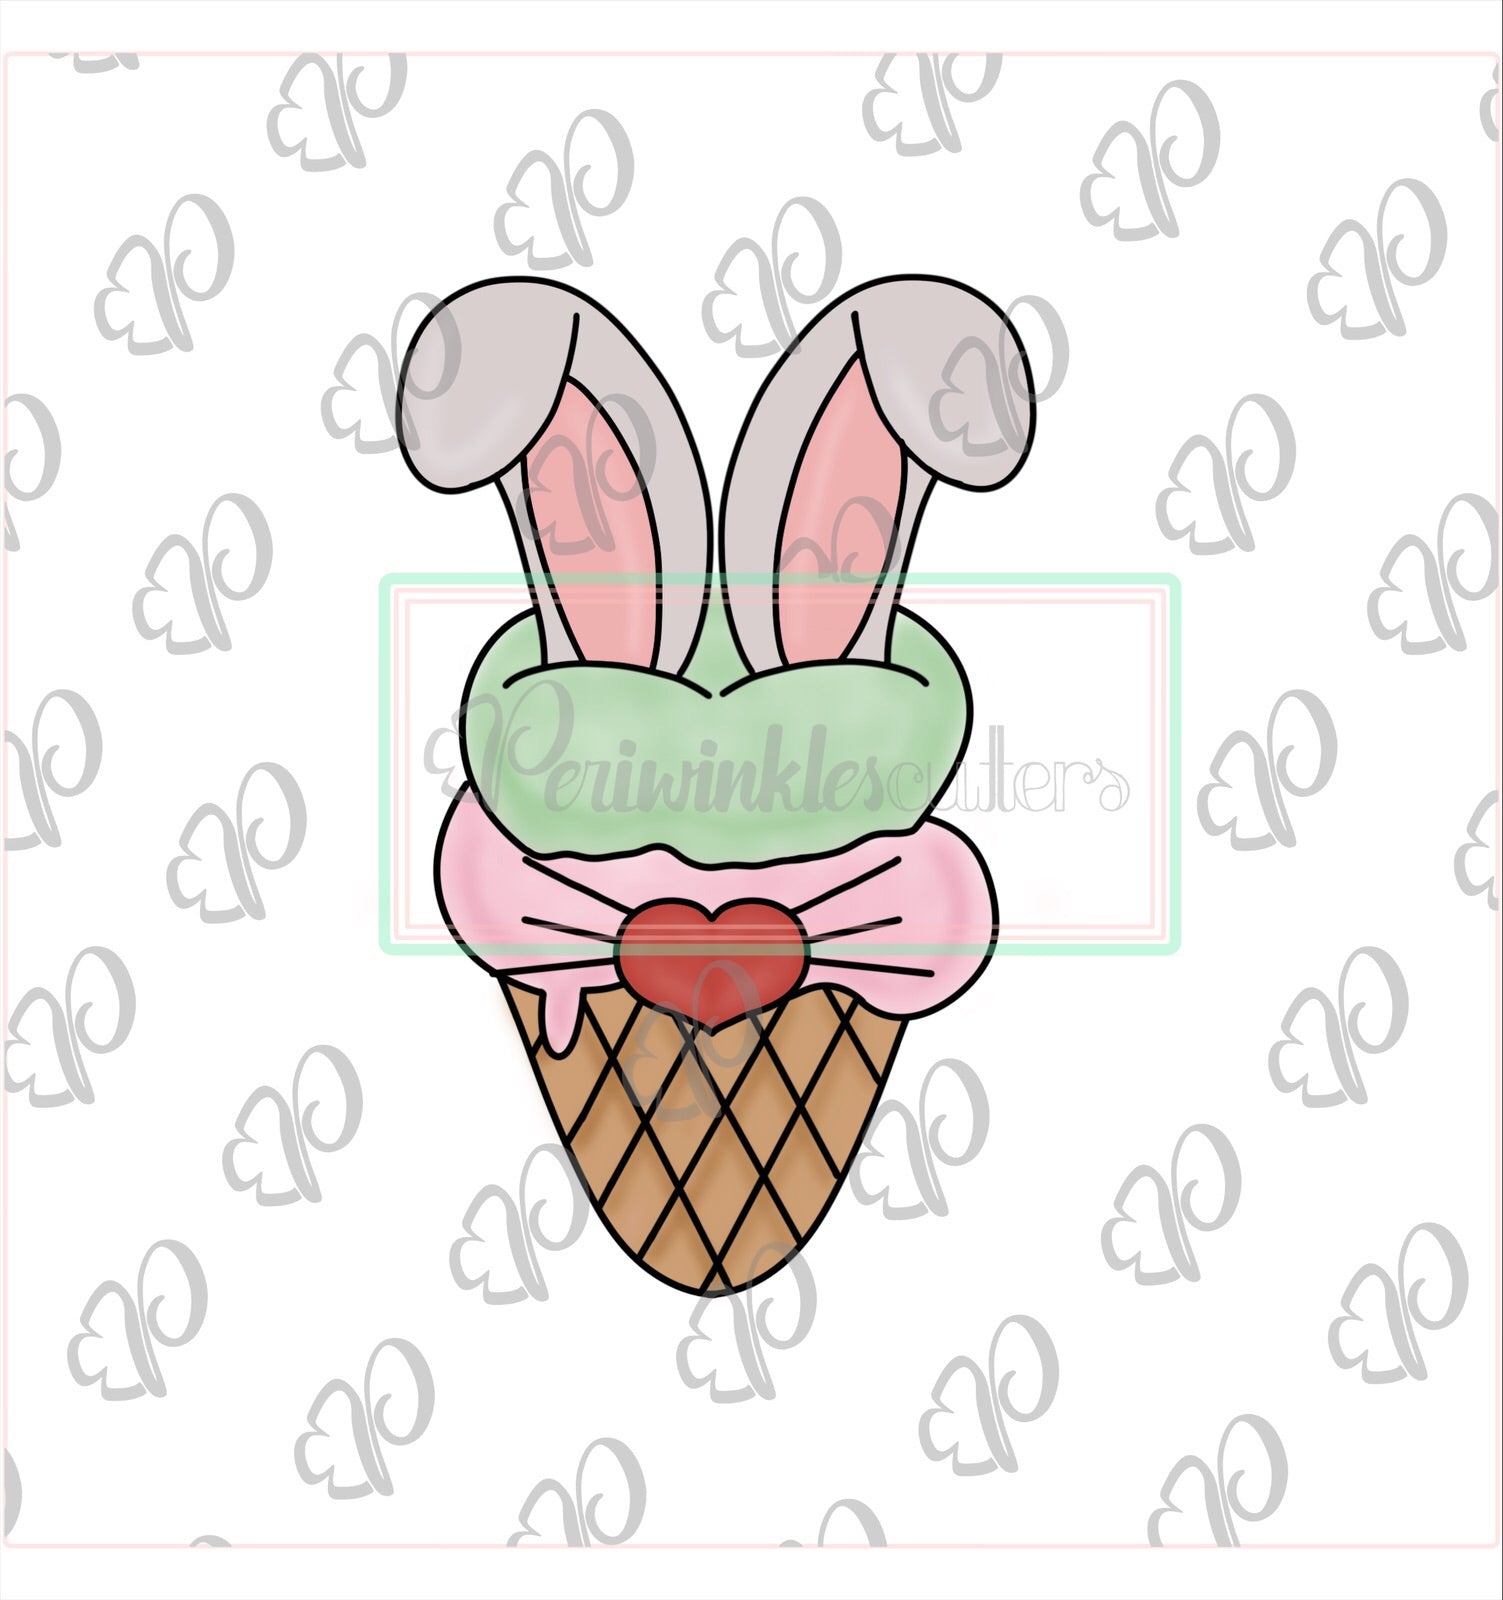 Bunny Ice Cream Cone Cookie Cutter - Periwinkles Cutters